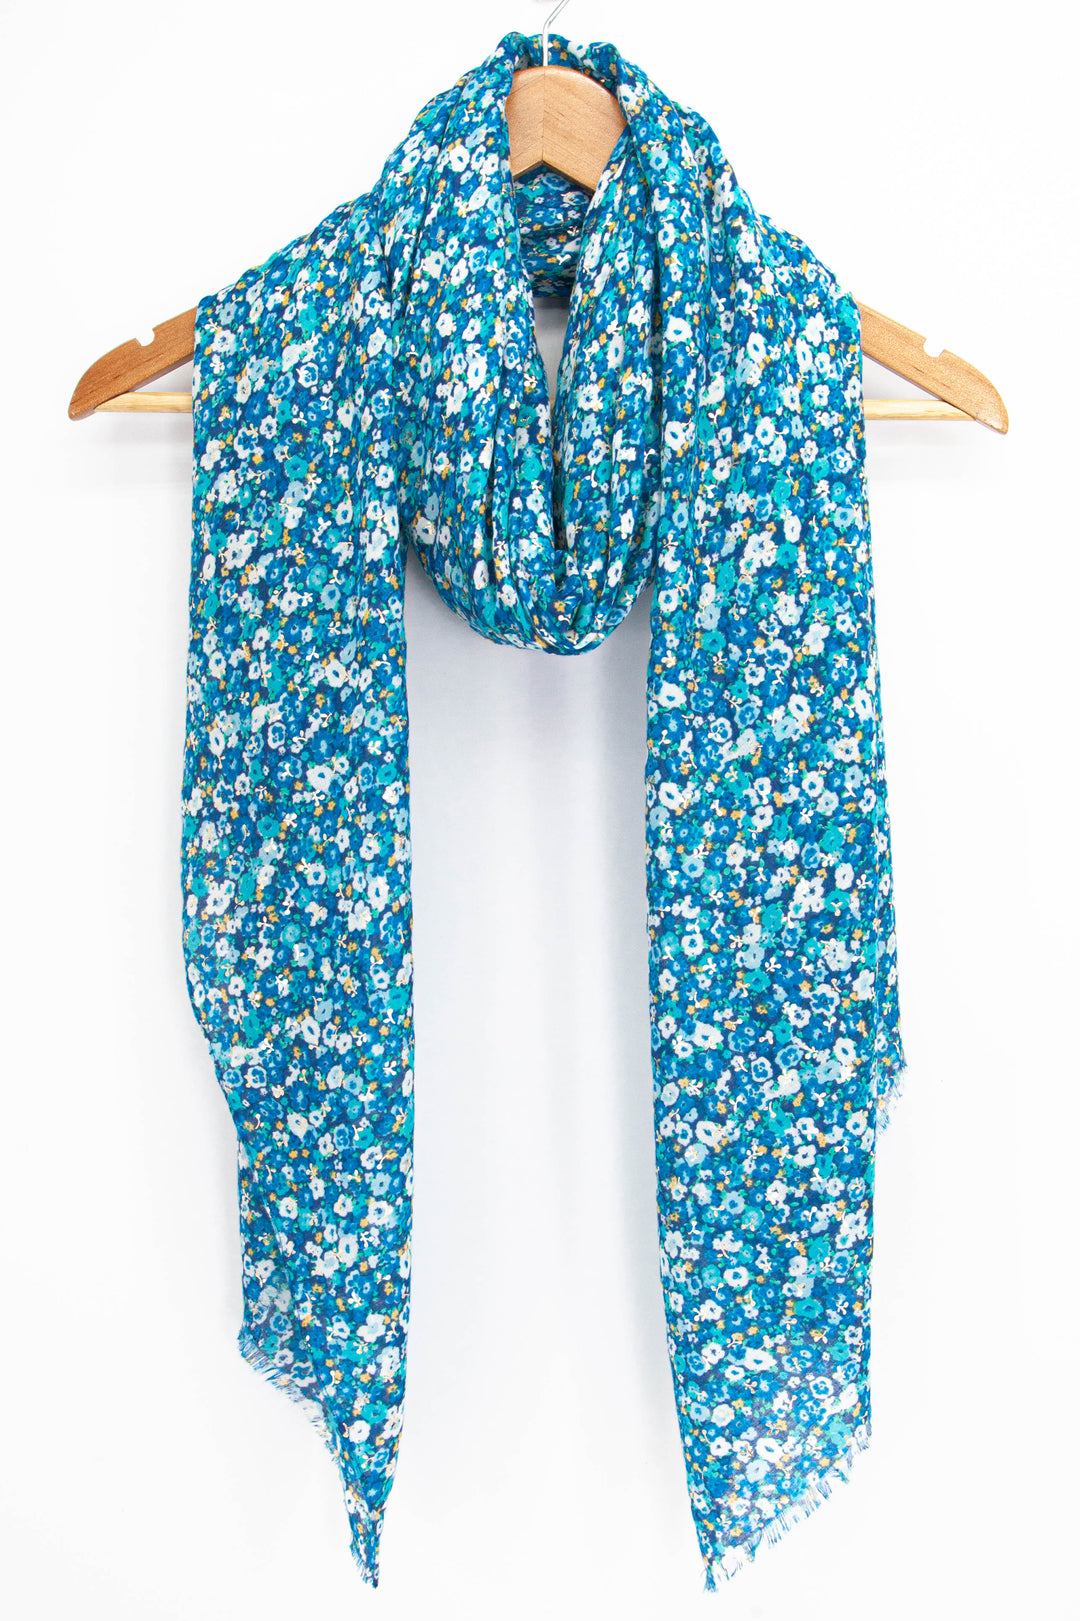 blue vintage floral print scarf with gold foil accents draped around a coat hanger